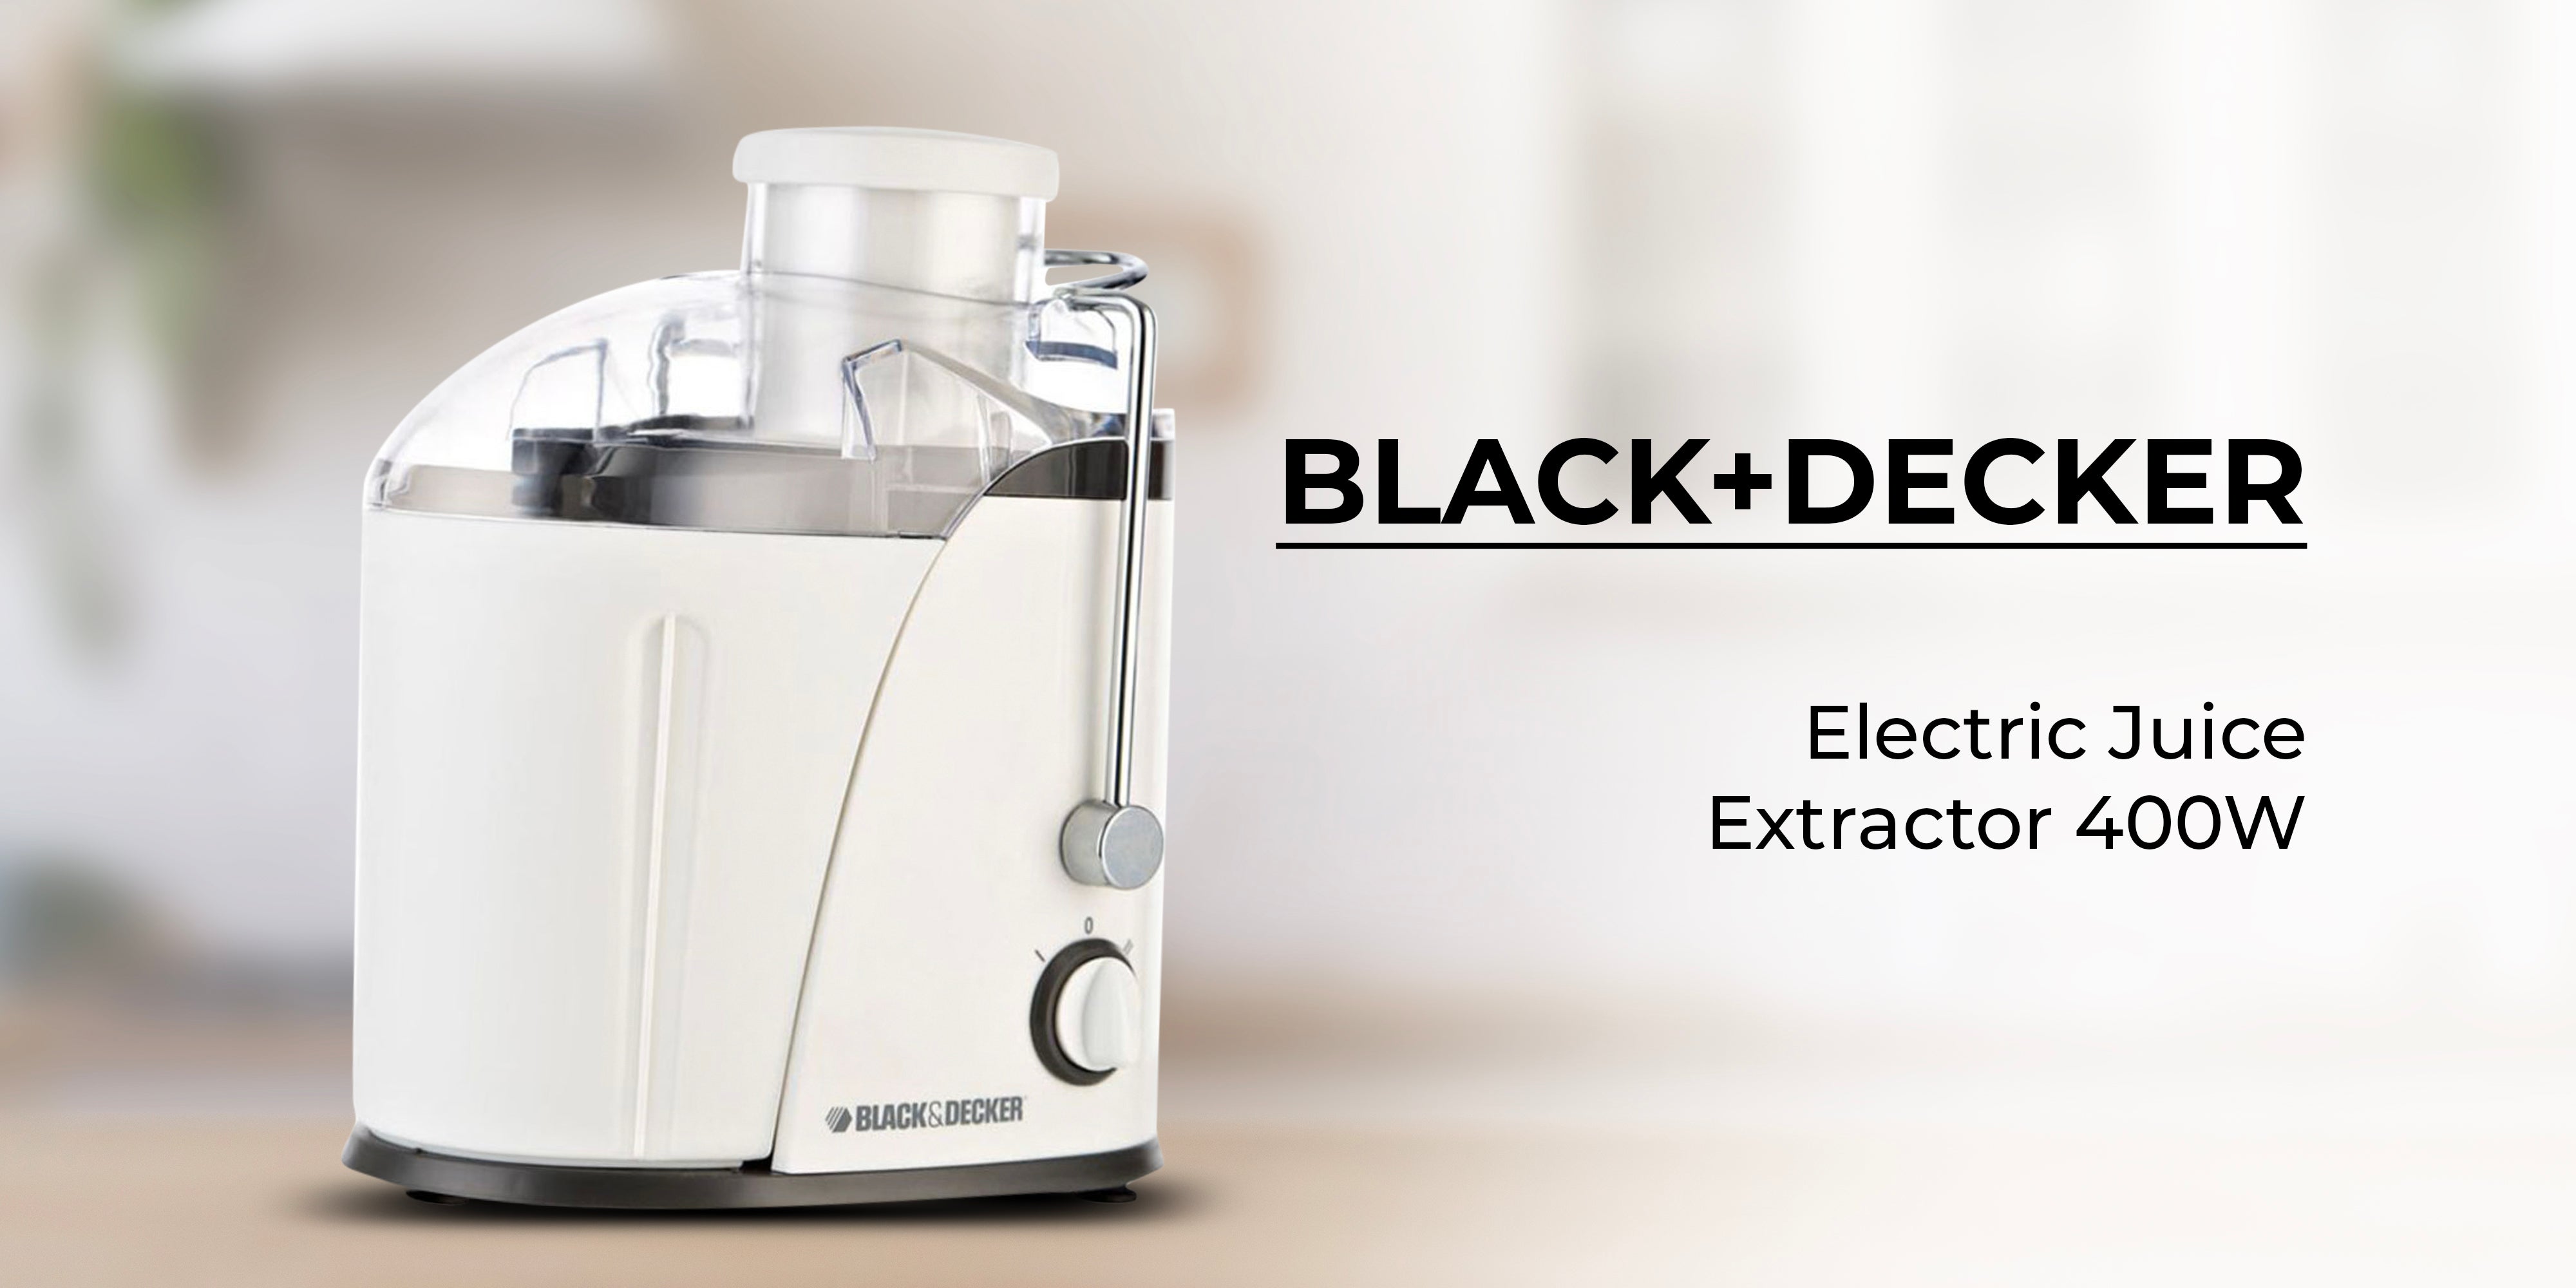 BLACK+DECKER Juice Extractor with Wide Feeding Chute 1.3 L 400.0 W